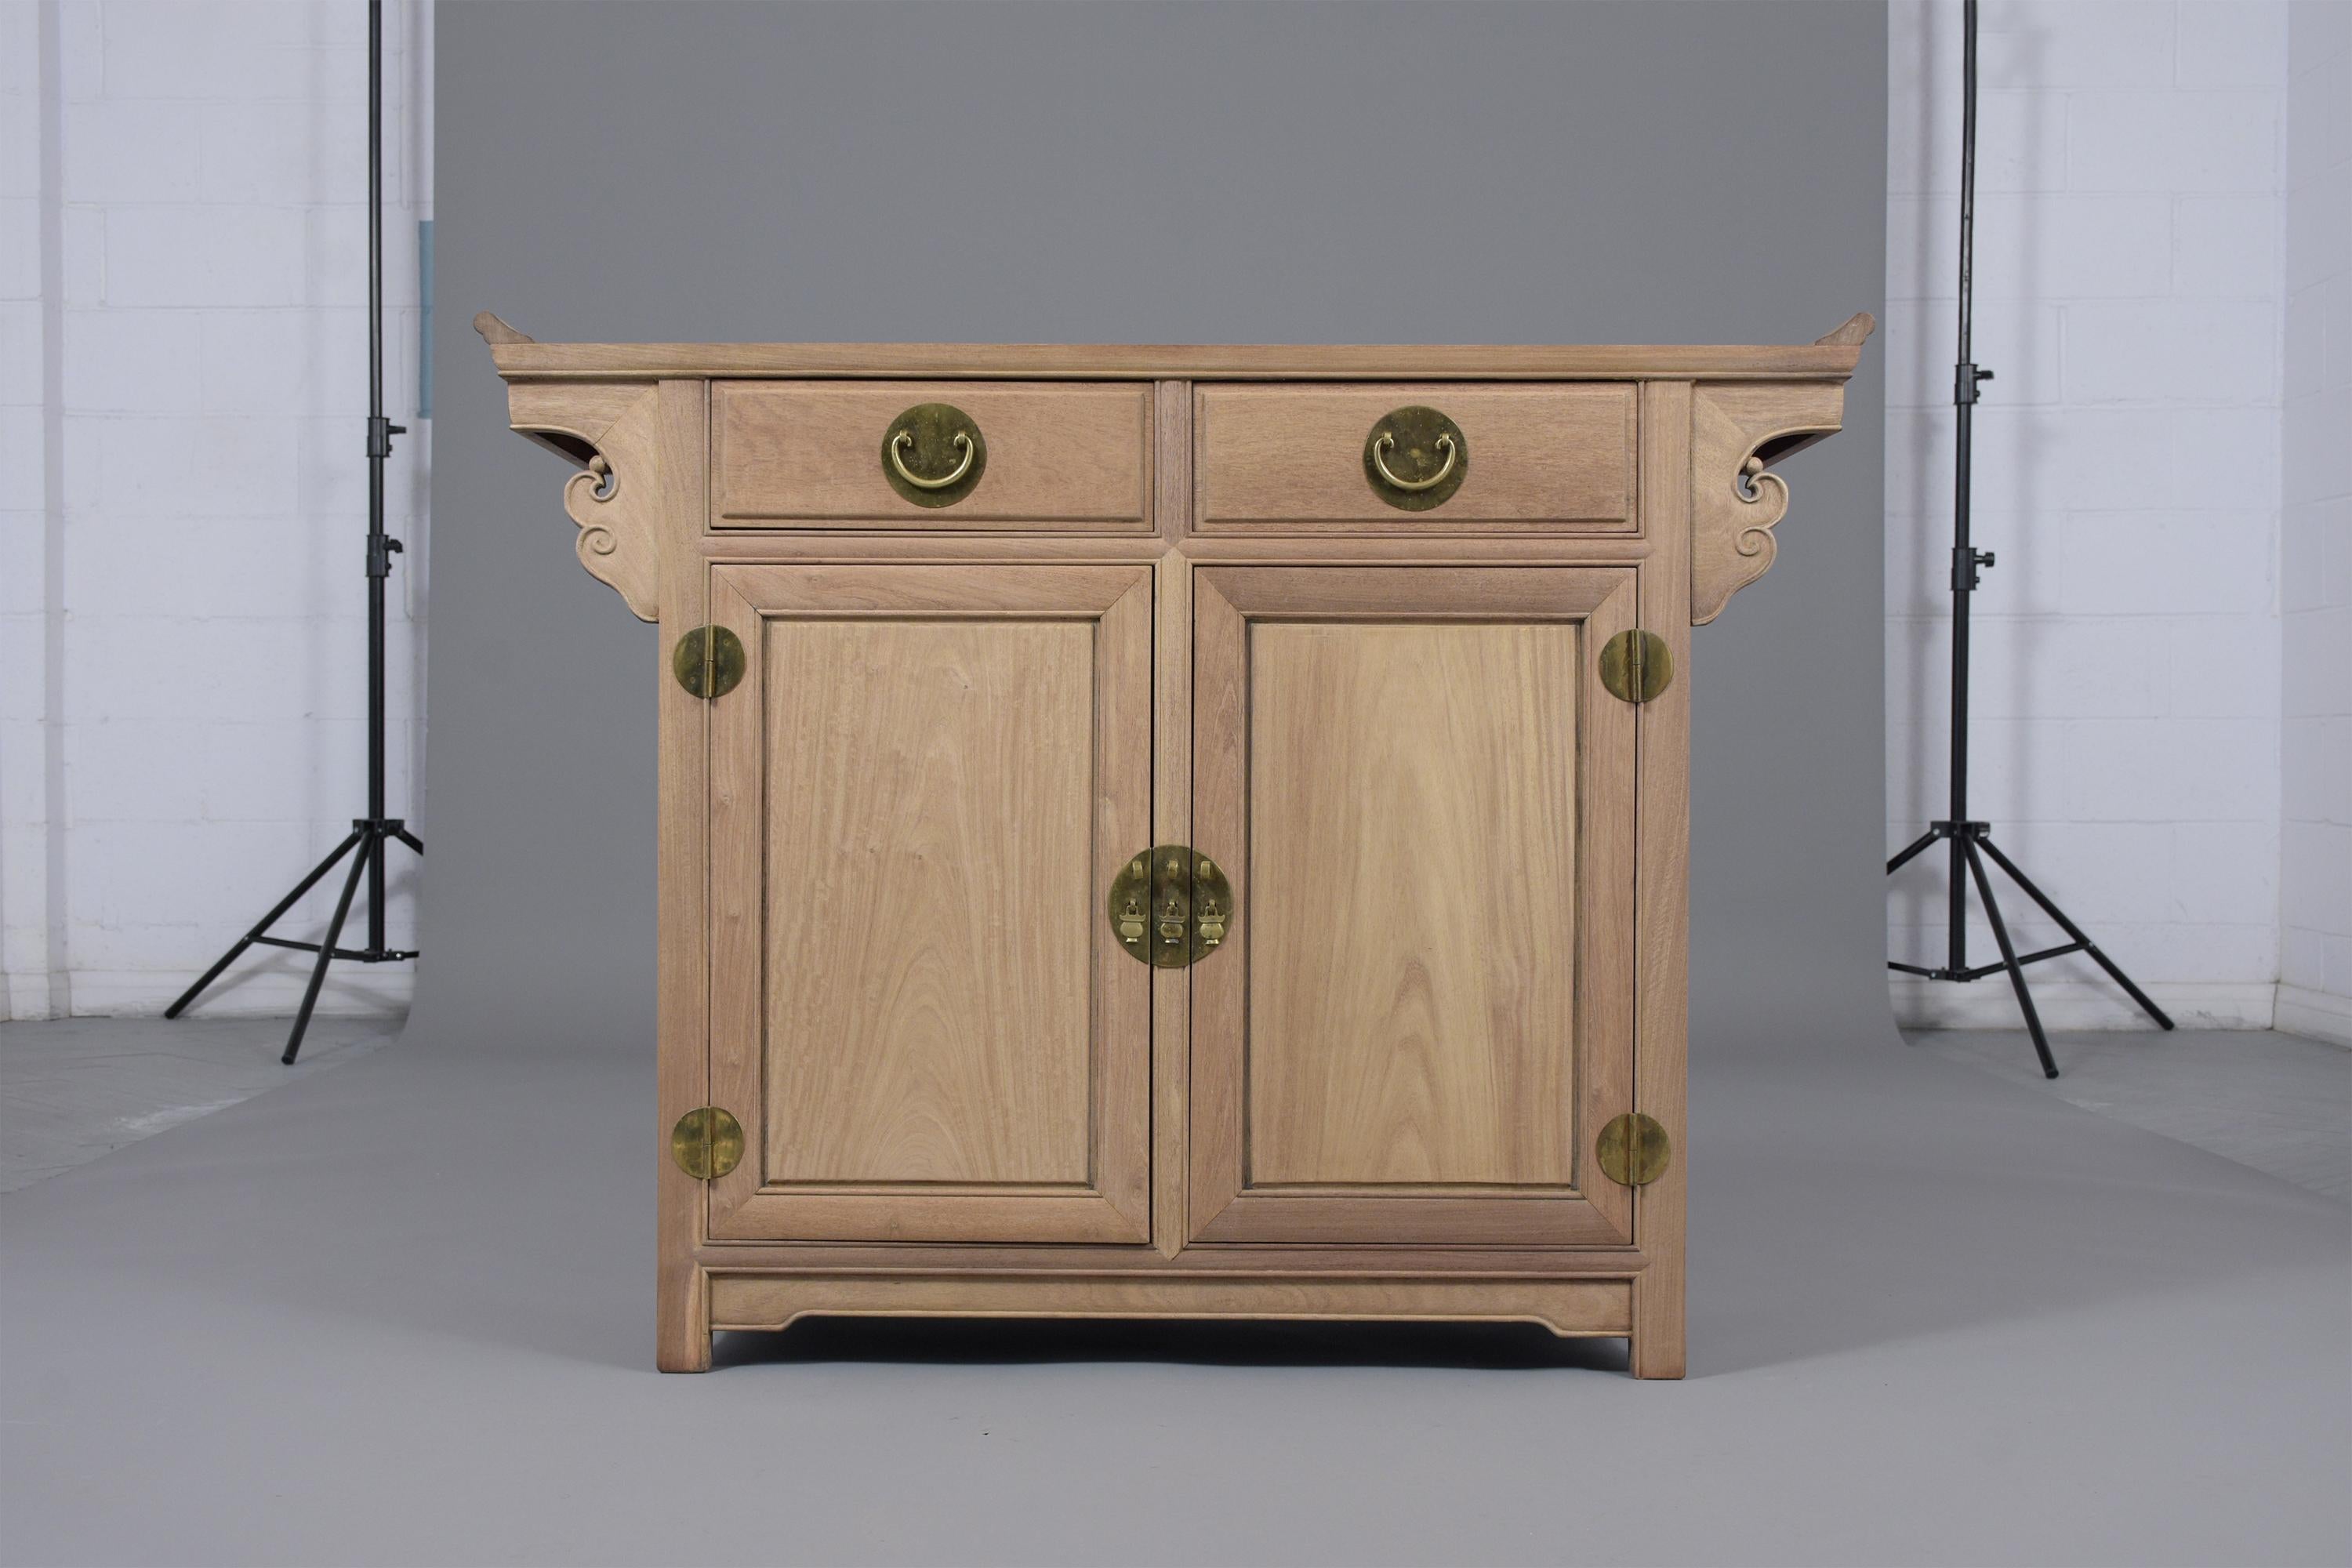 This vintage Chinese cabinet hand-crafted out of mahogany wood has been fully restored, features a unique bleached wood finish and carved arched motifs on the top. The cabinet has two top drawers and two doors with single brass ornament details and